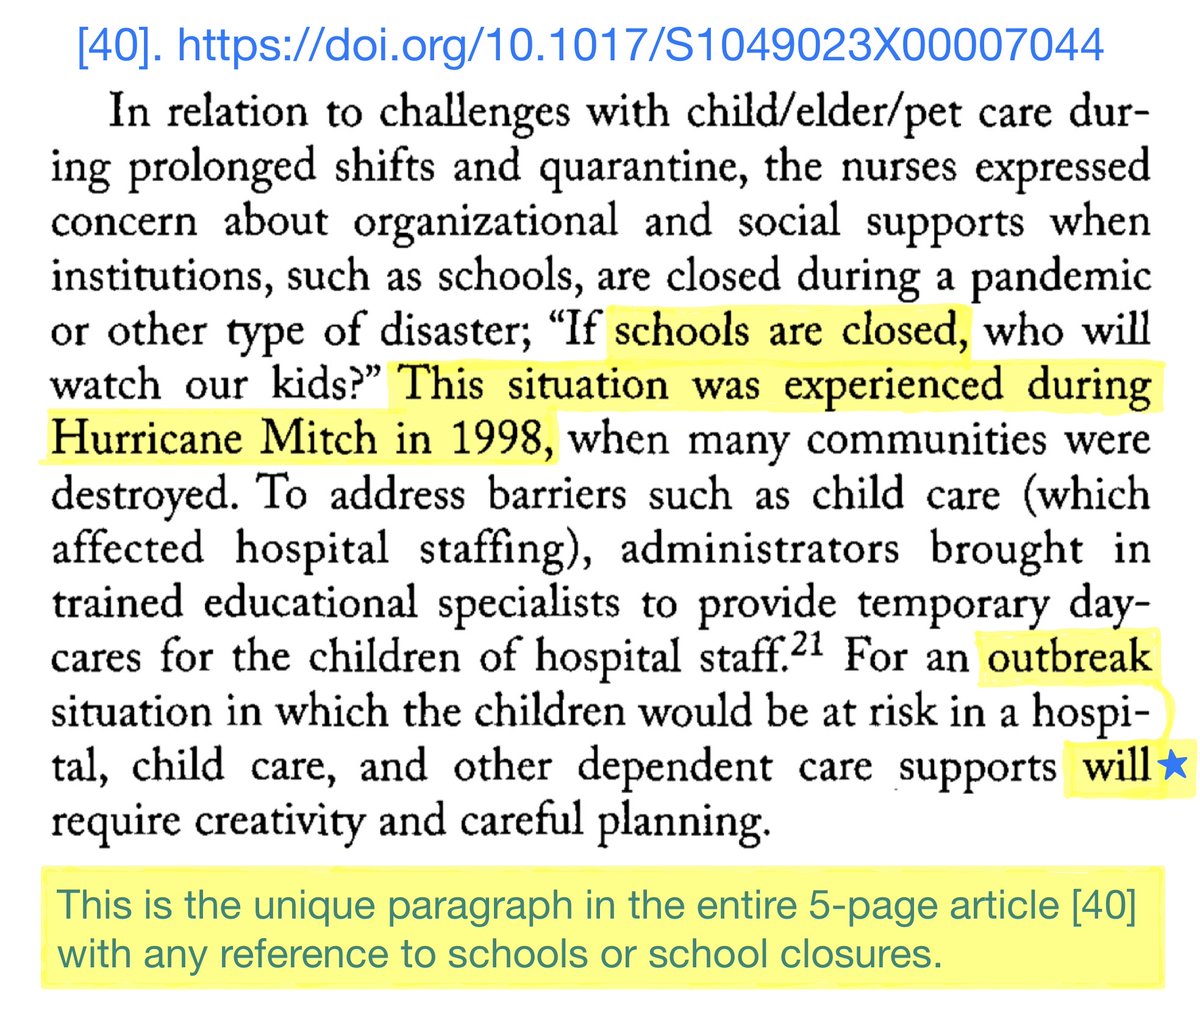 1 article is a 2008 qualitative survey of Canadian nurses on concerns about future epidemics.Viner twice implies this article discussed nurse hardship caused by SARS 2003 school closures.But that's false: with only 250 SARS cases, Canada didn't even *use* school closures. 7/